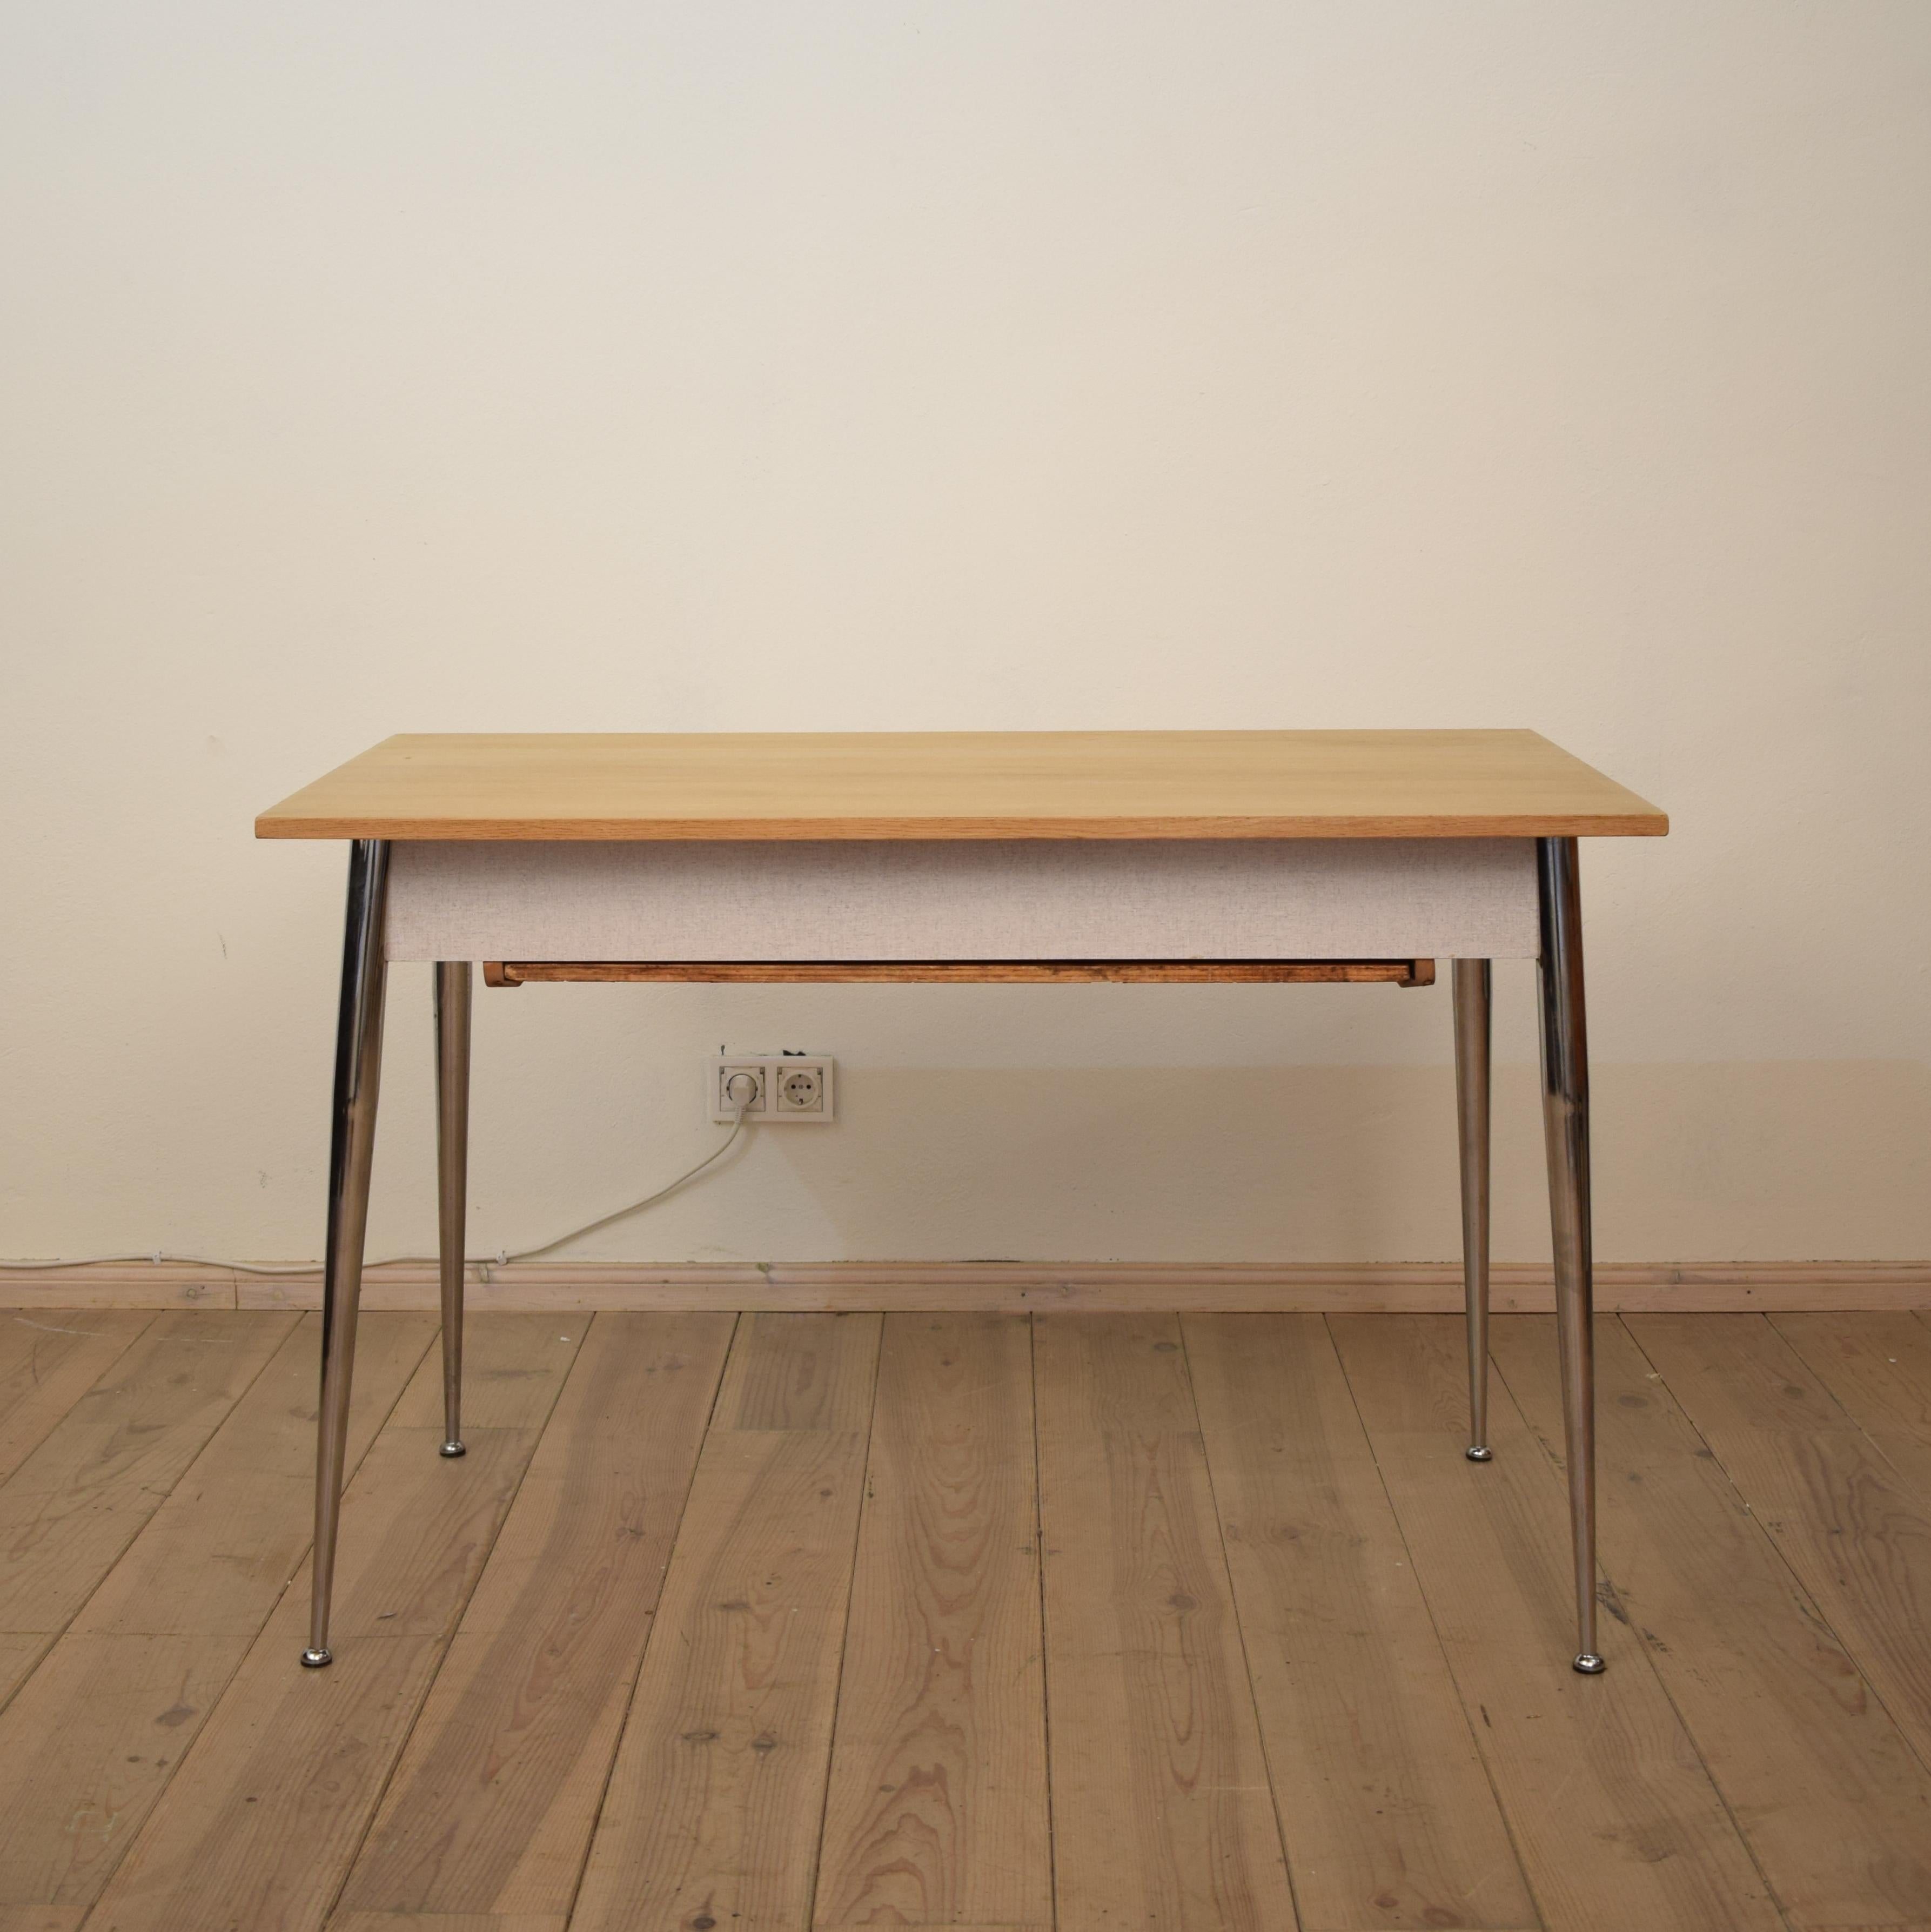 Midcentury Italian Formica Kitchen Pasta Table with Tapered Chrome Legs, 1950 In Good Condition For Sale In Berlin, DE